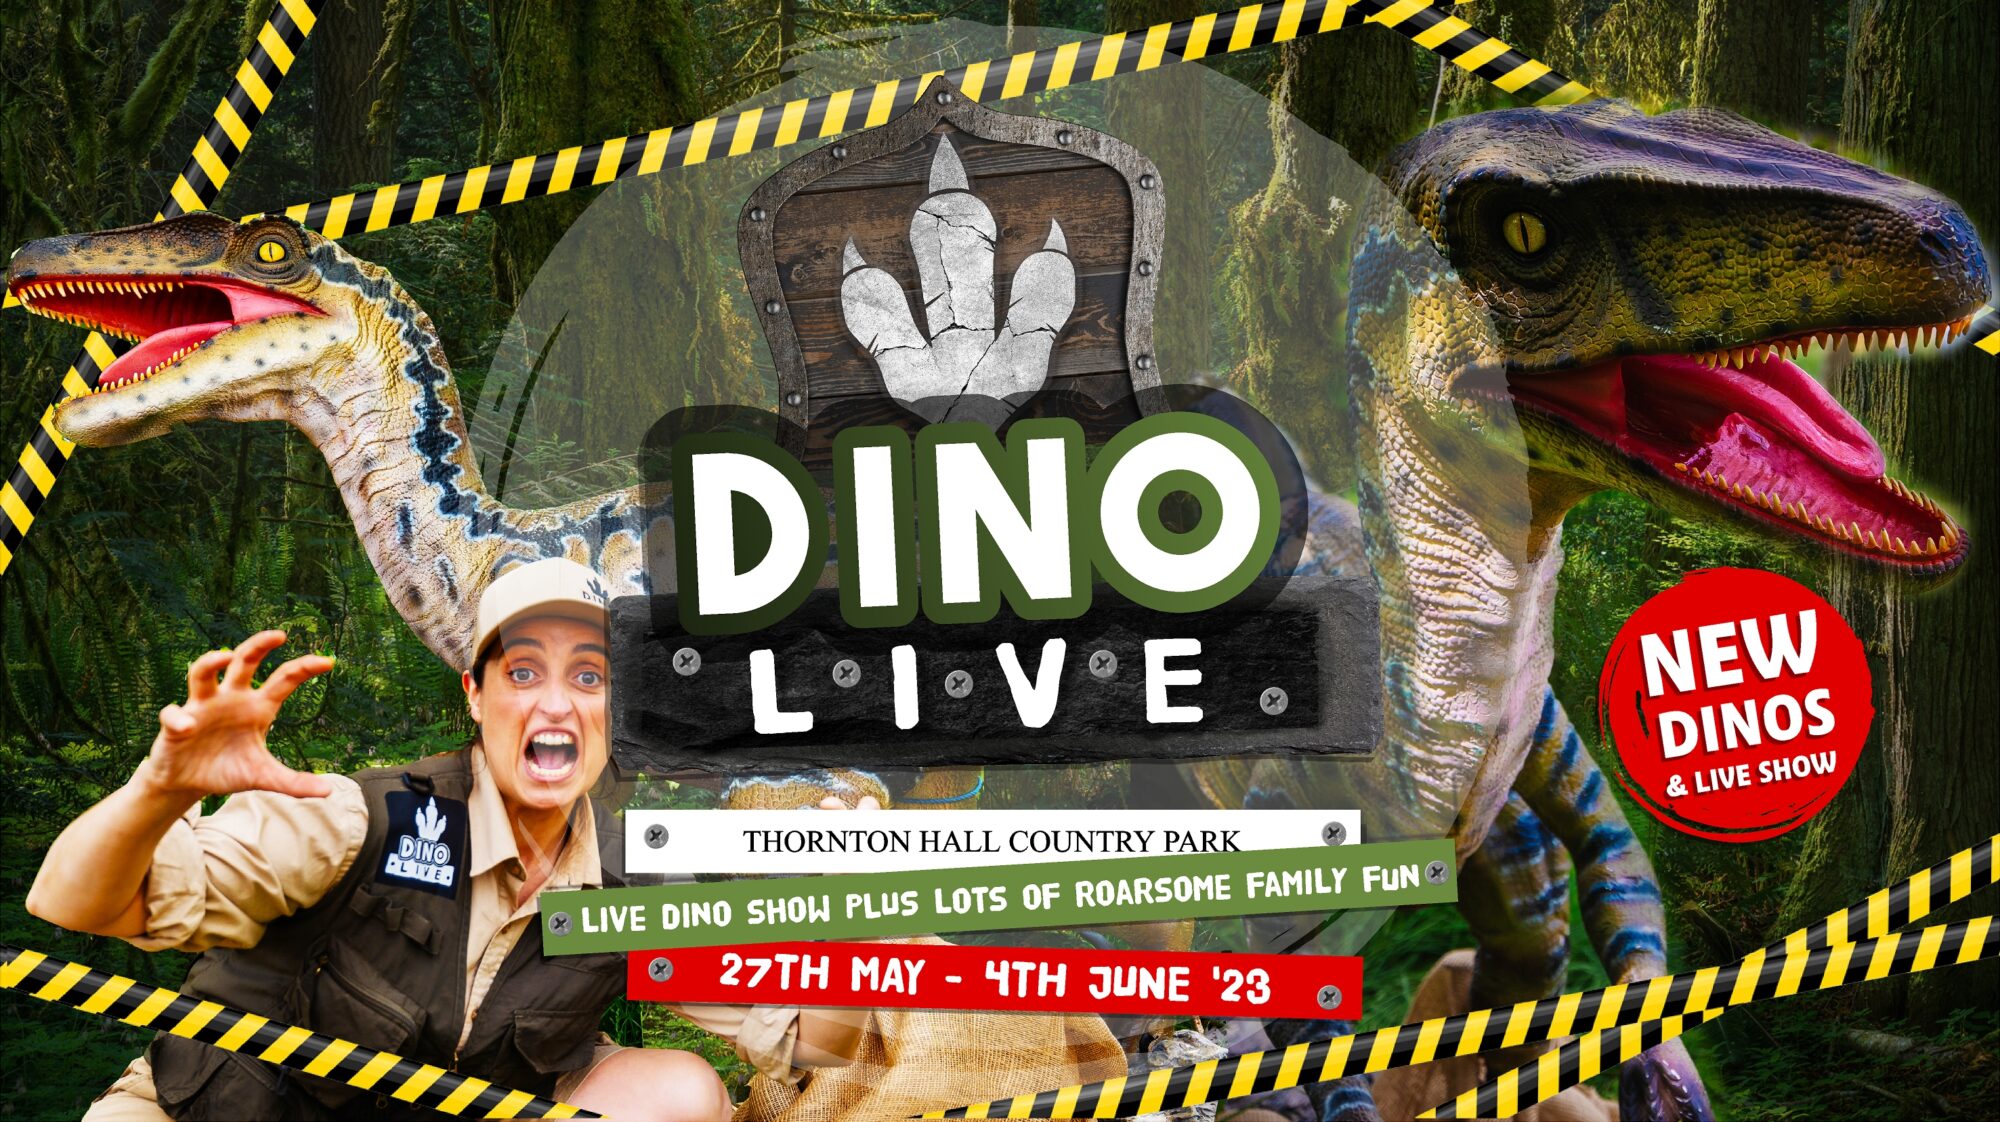 Image name Dino Live Rect Web tickets the 3 image from the post Dino Live in Yorkshire.com.